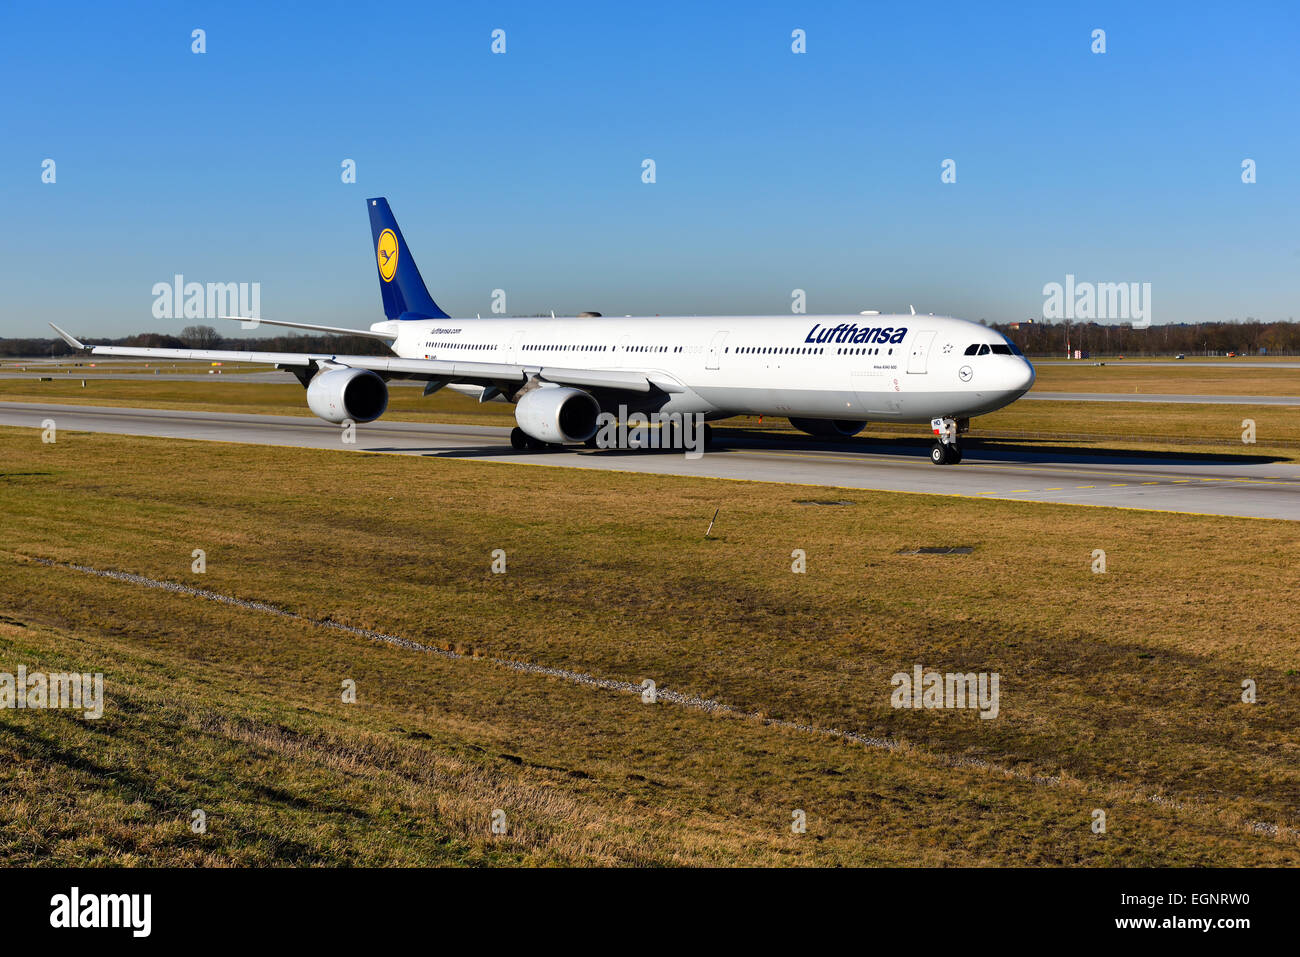 lufthansa, Airbus, a 340, roll out, taxiway, Stock Photo